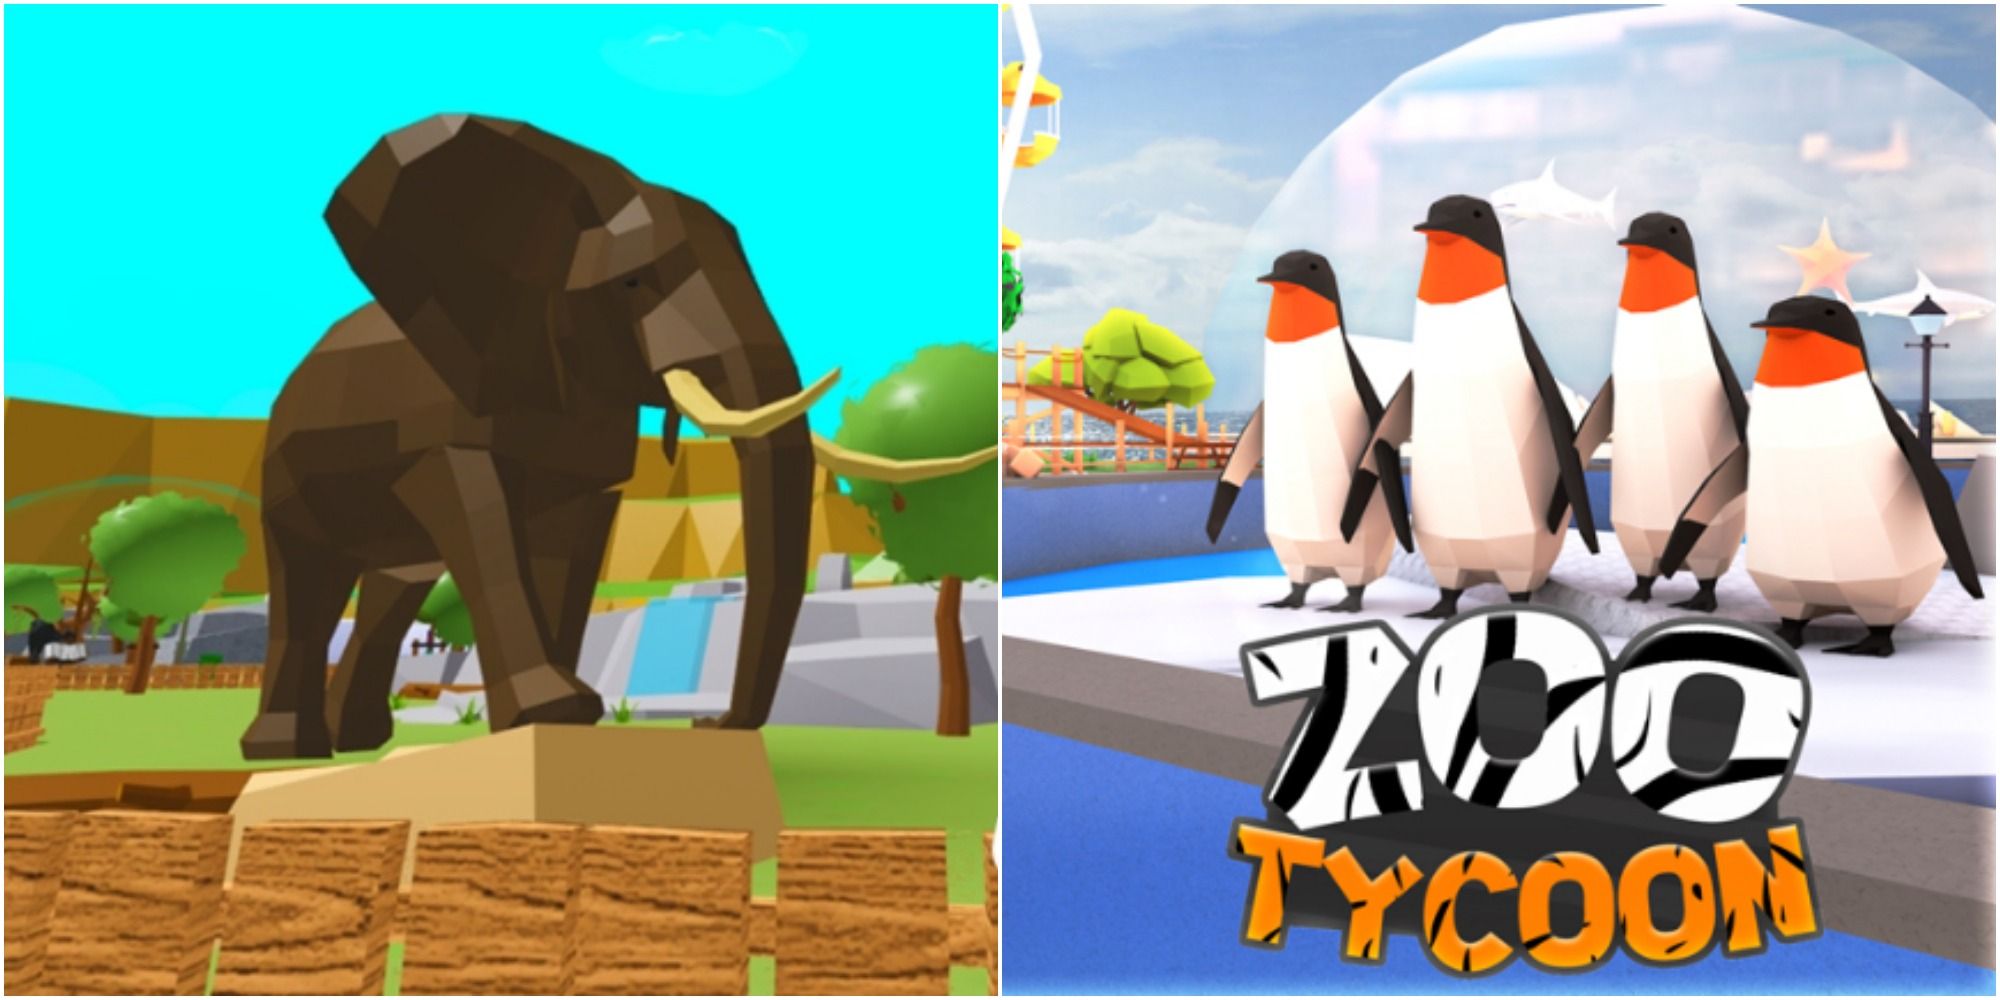 Split image a Zoo Tycoon elephant in Roblox on the left, with some penguins and the game's logo on the right.